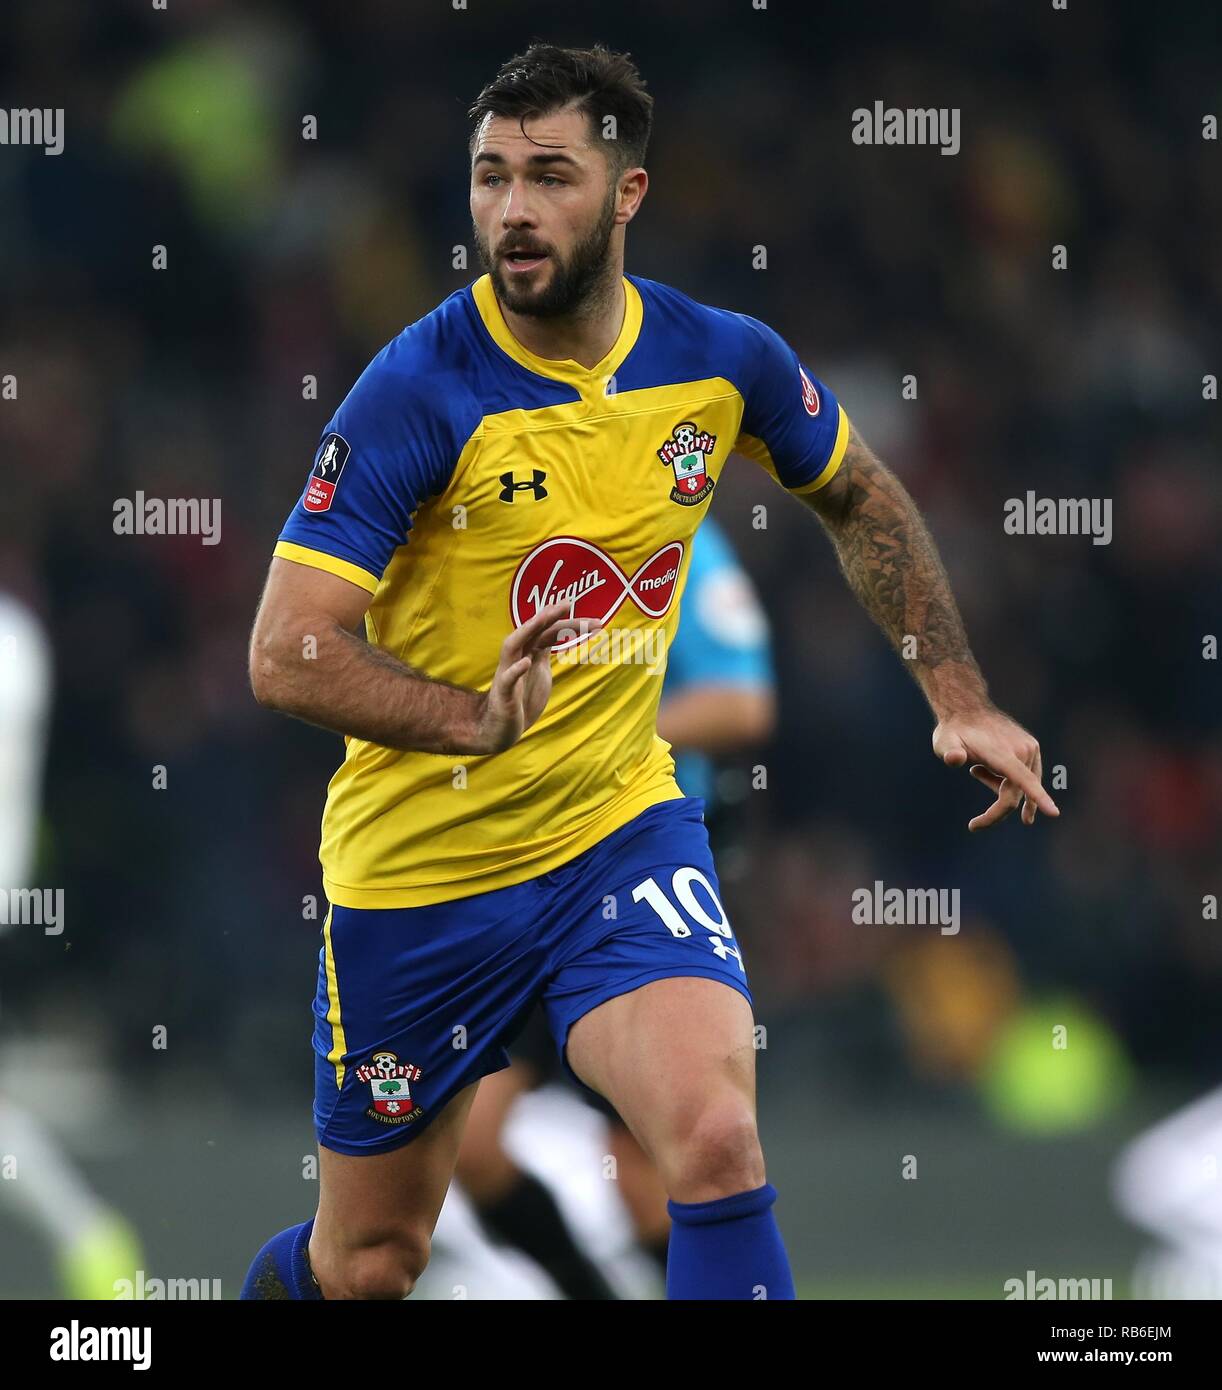 CHARLIE AUSTIN, Southampton FC, DERBY COUNTY V SOUTHAMPTON, die Emirate FA Cup 3. Runde, 2019 Stockfoto